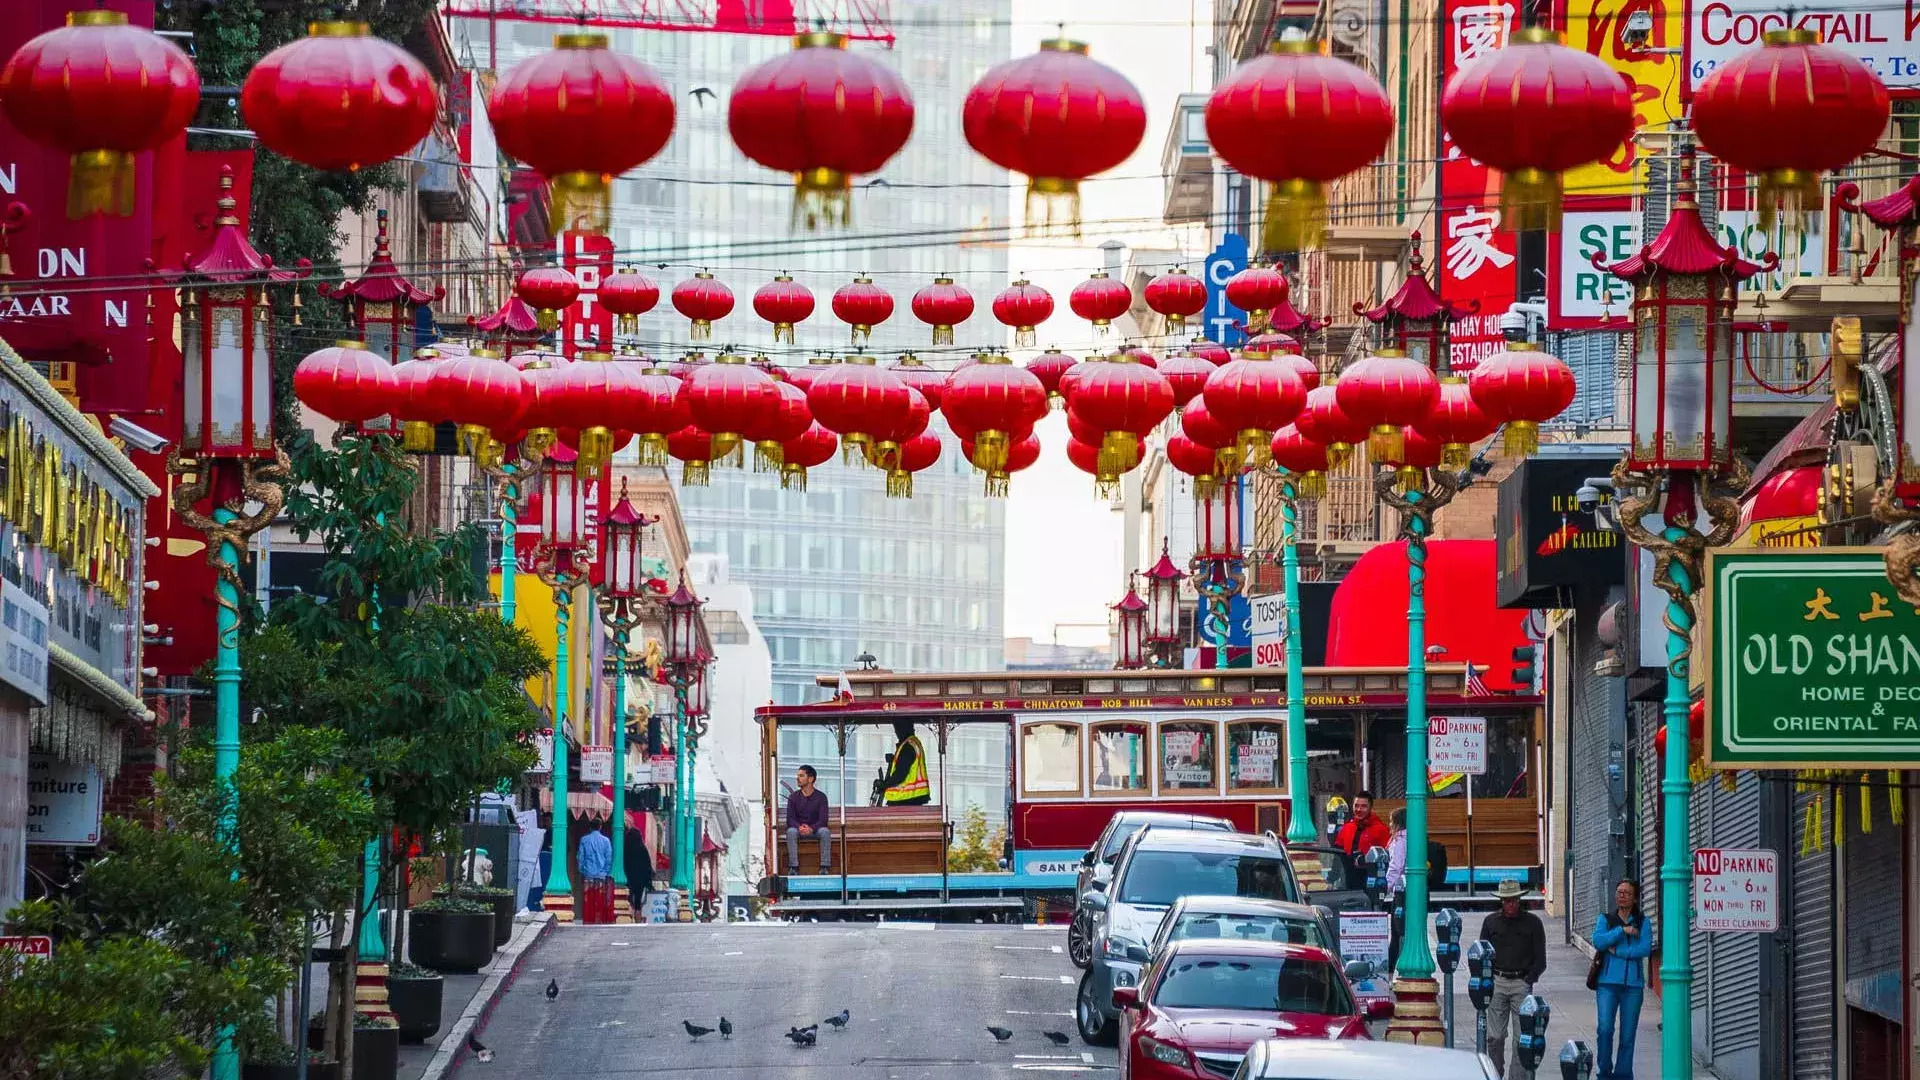 18 Best Things to do in Chinatown, San Francisco